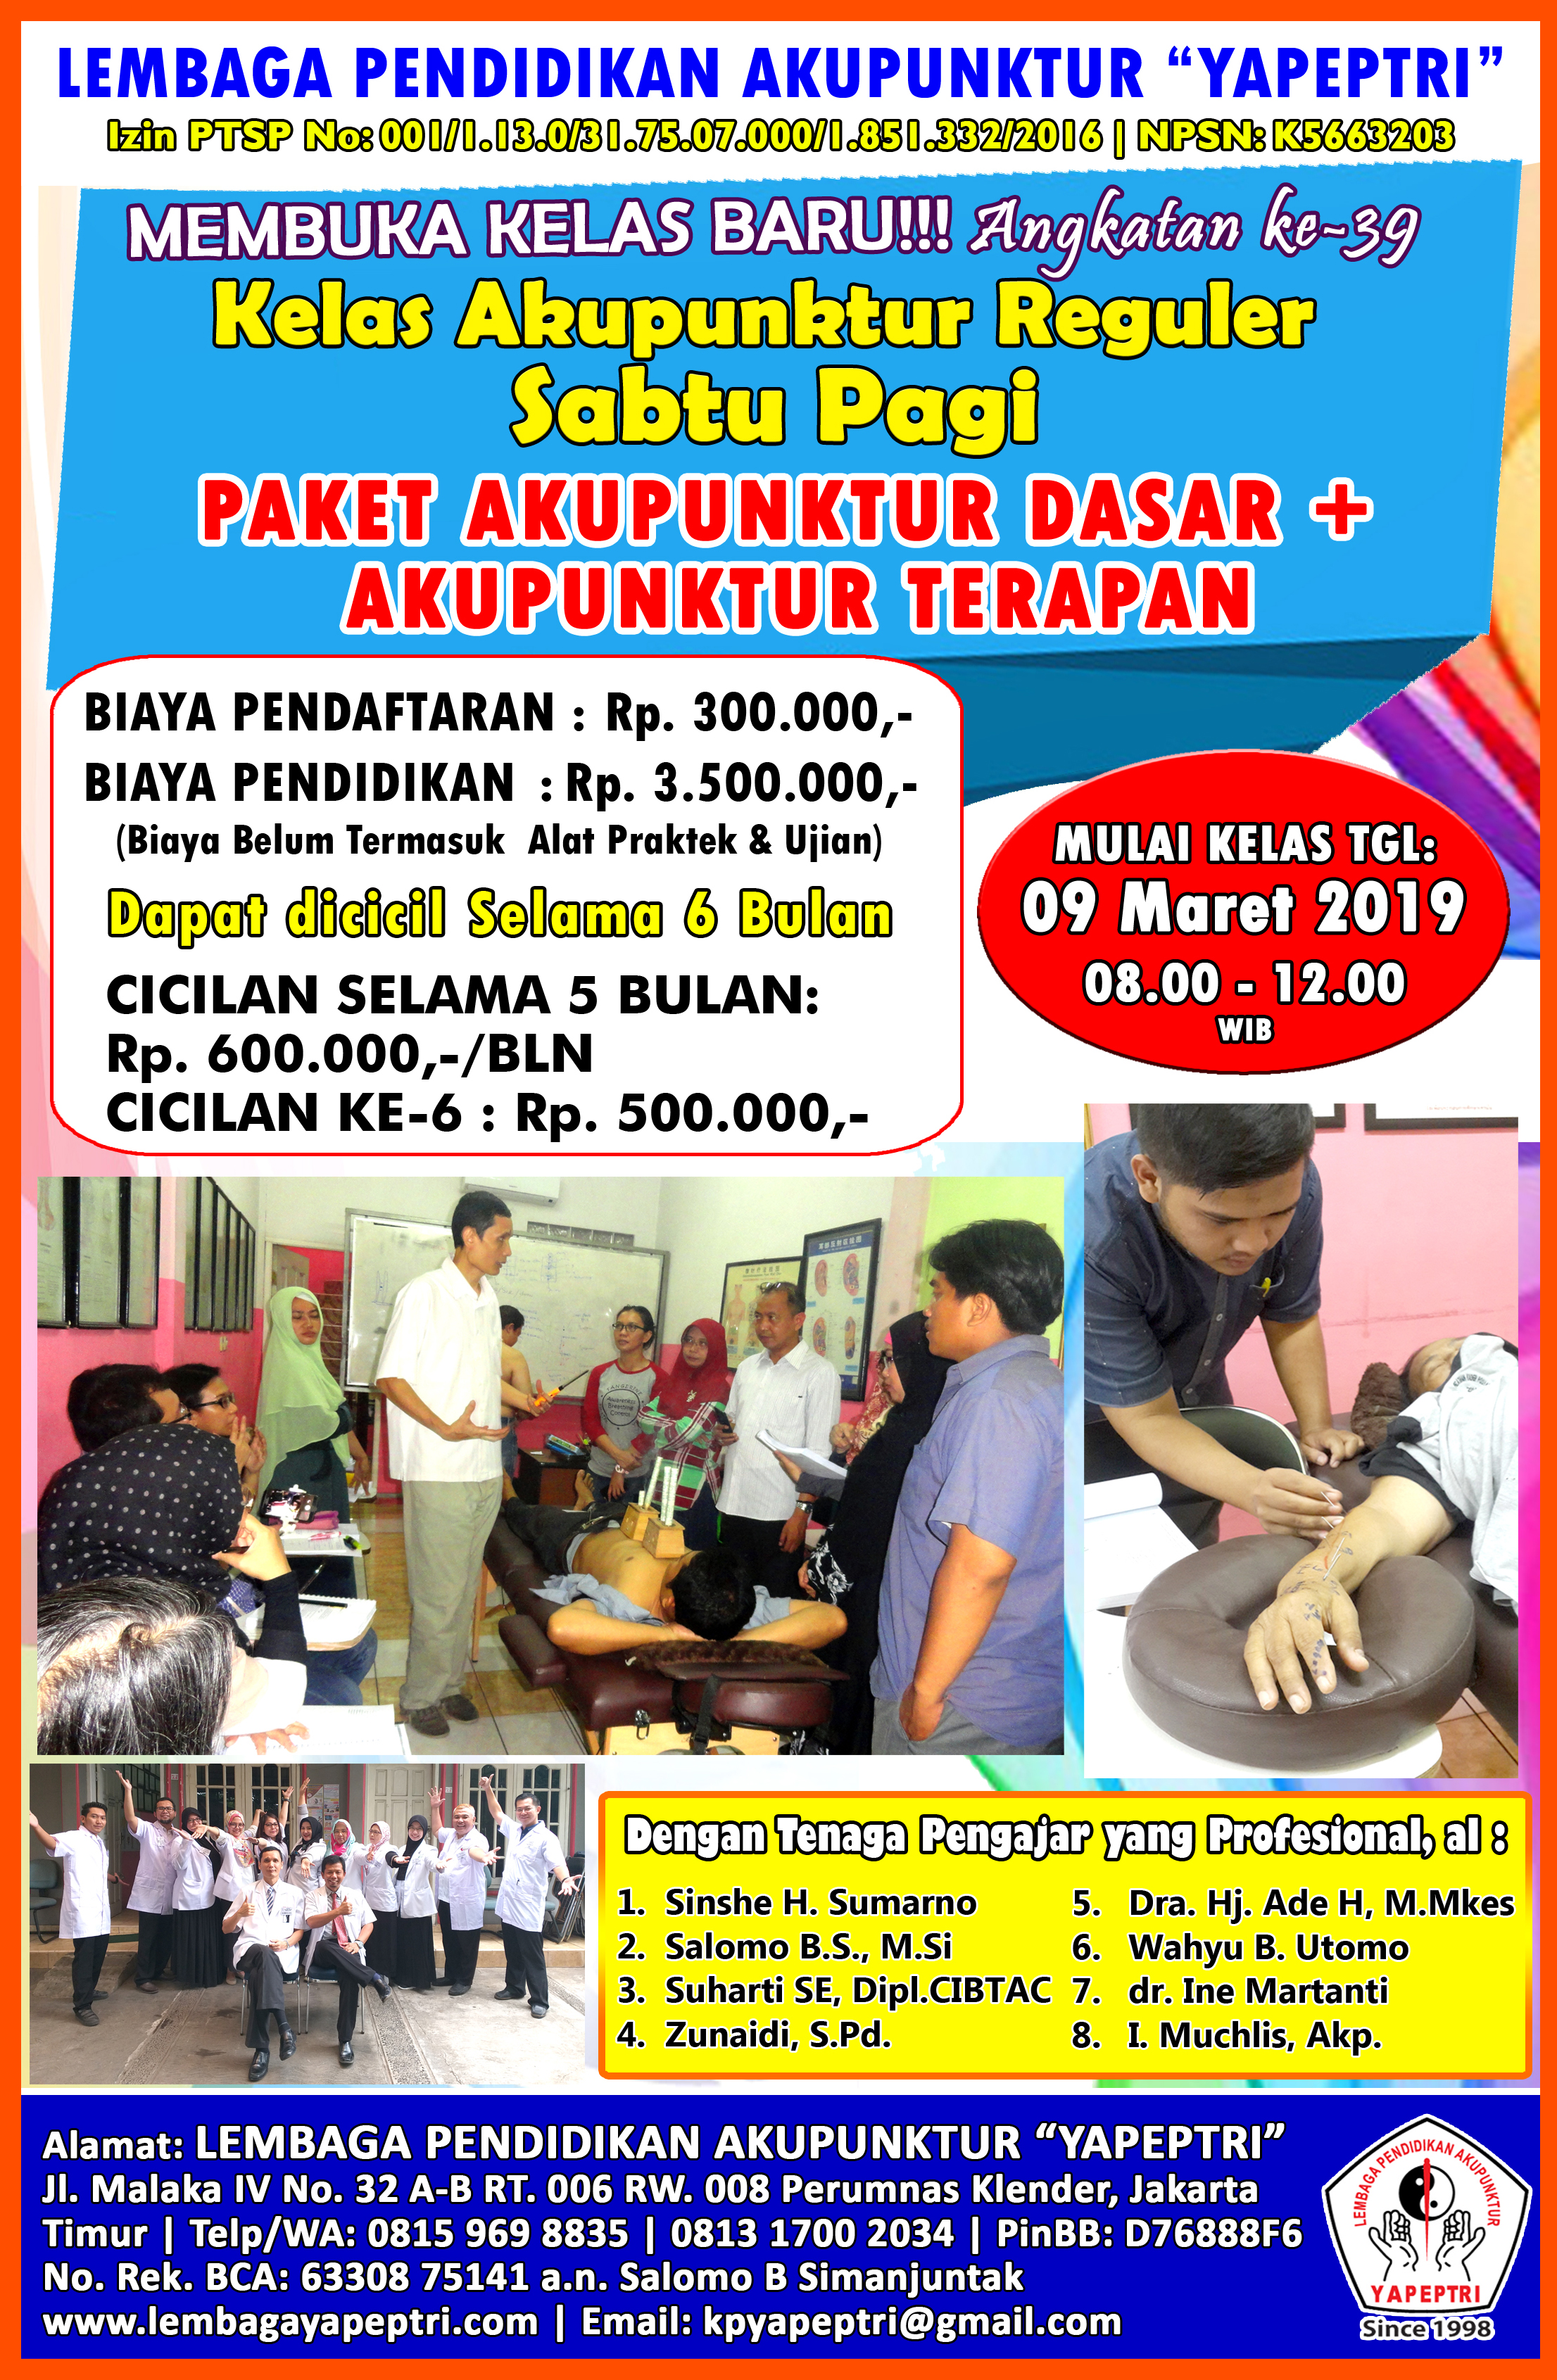 Seminar dan Workshop Trigger Point Therapy "ONE NEEDLE STYLE" "Dry Needling For Pain Management" Level 1 Basic